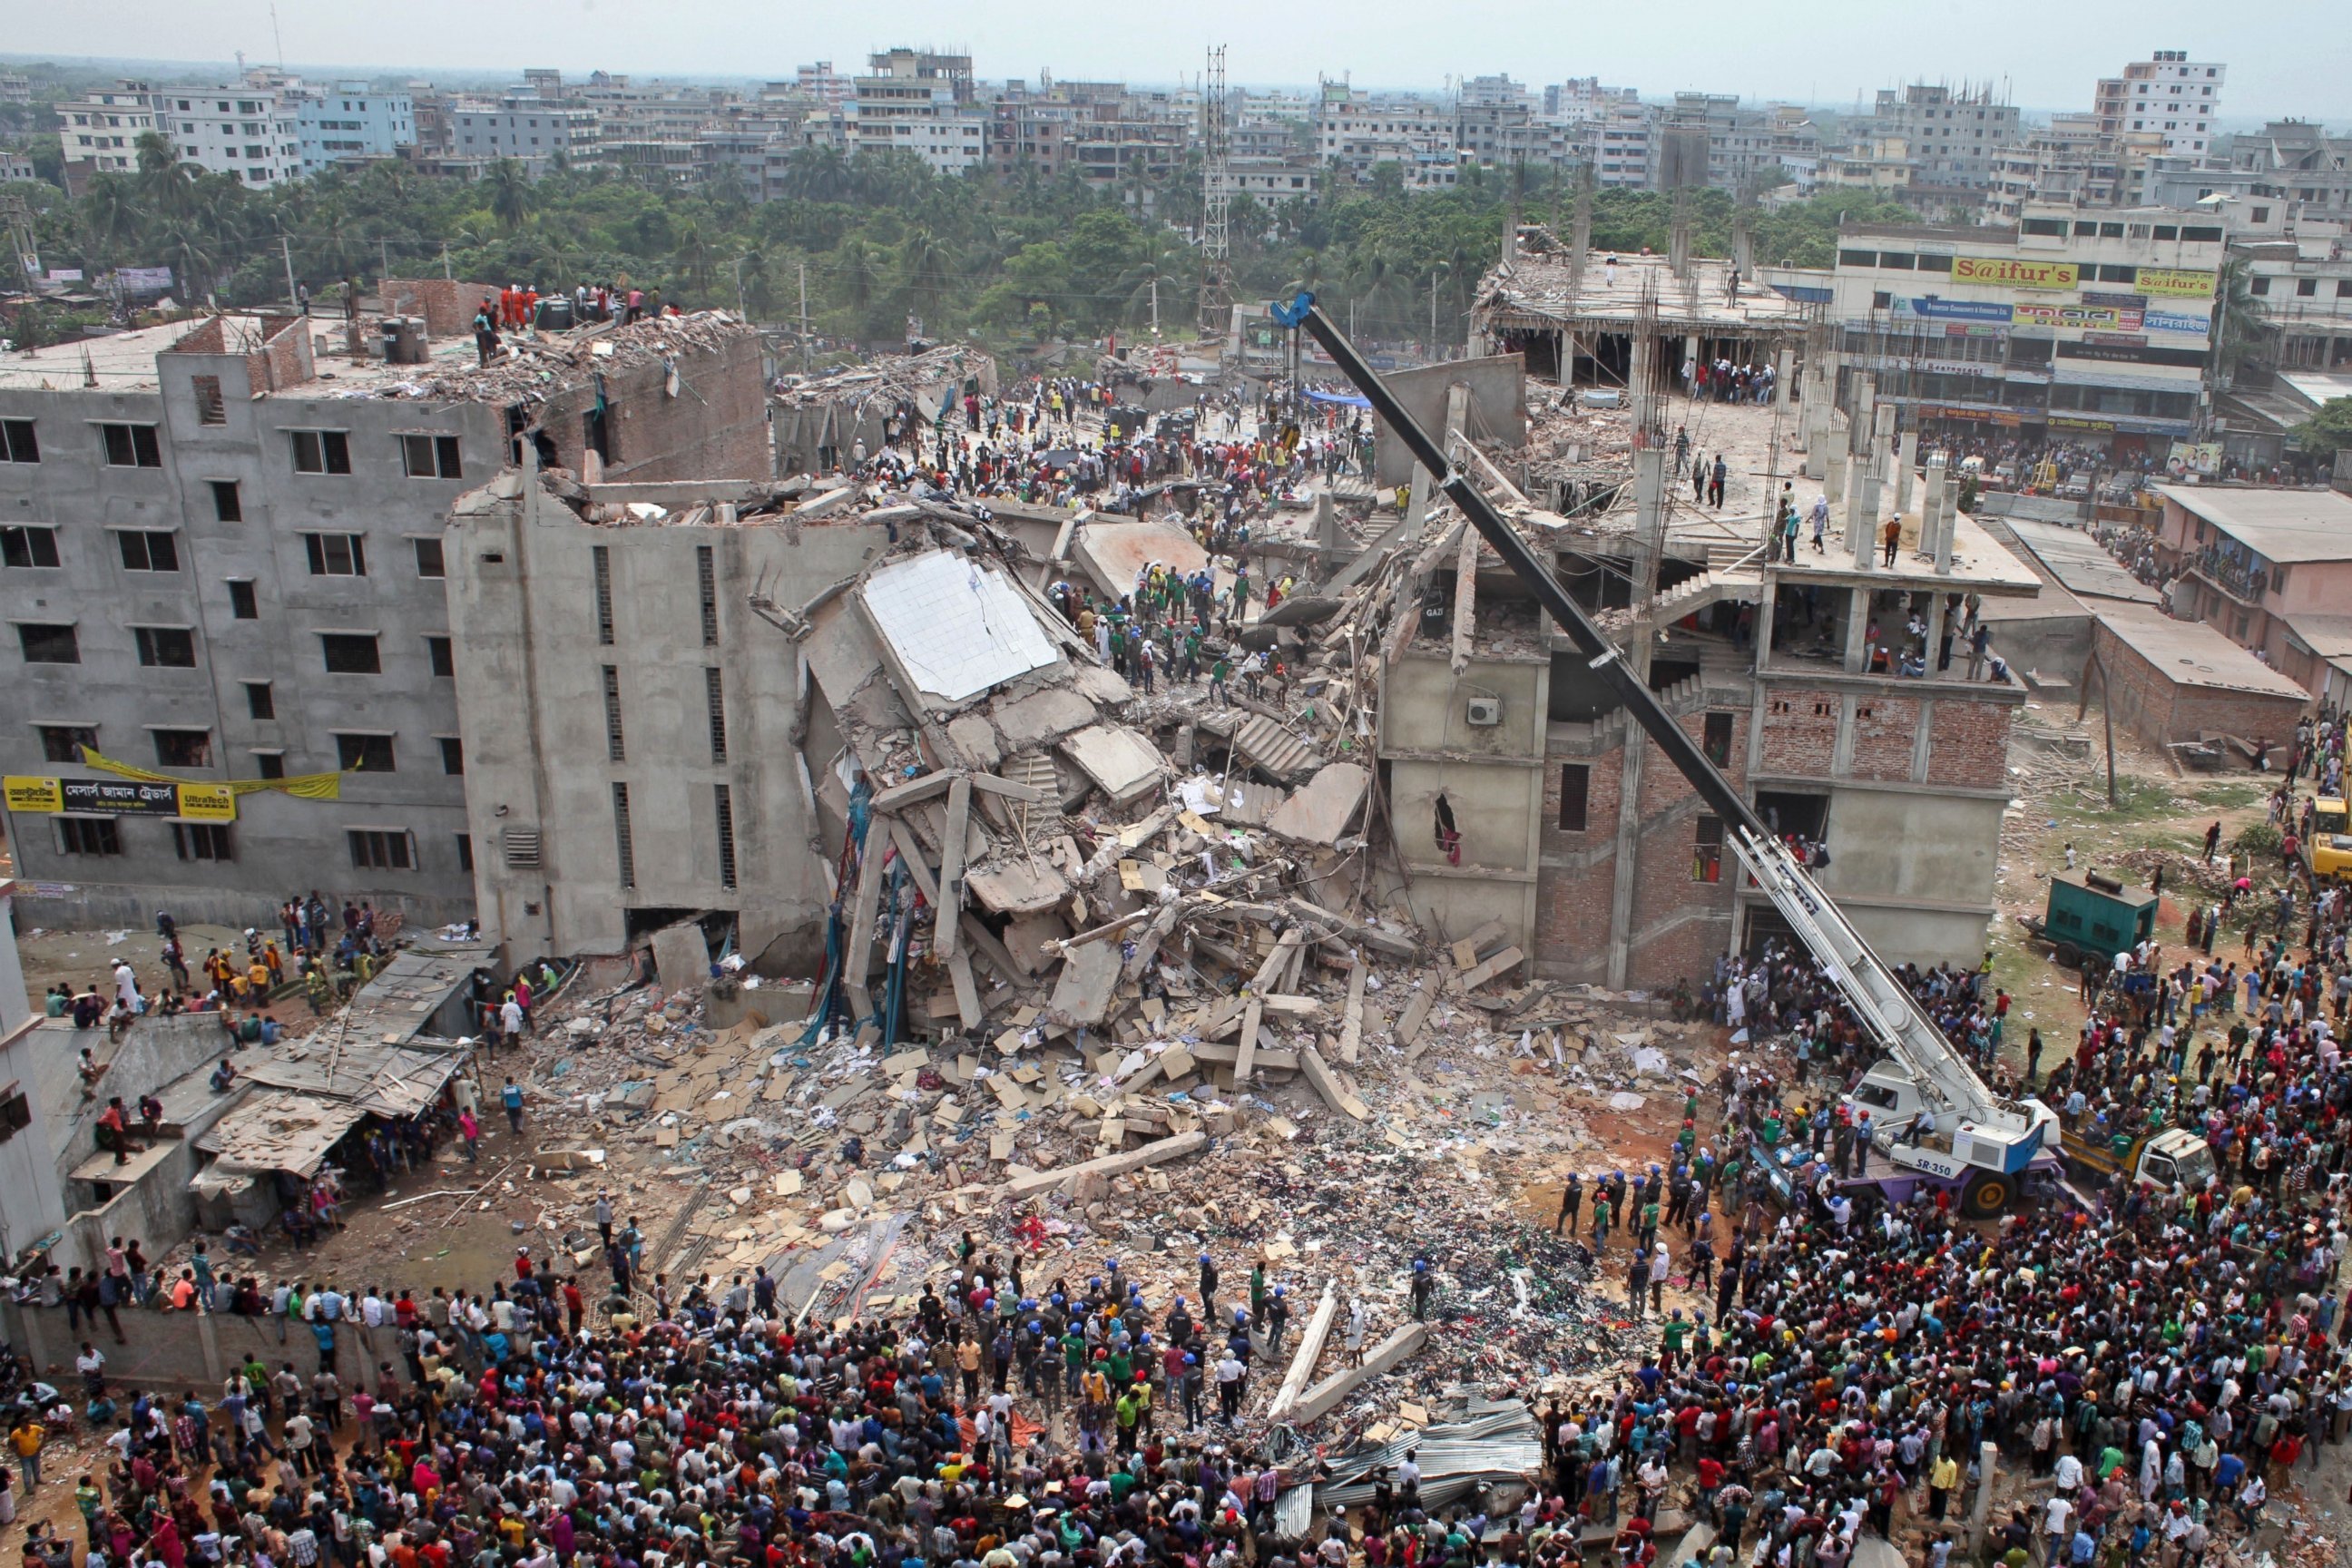 PHOTO: A file photo dated April 24, 2013 shows the general view of the Rana Plaza building collapse in Dhaka, Bangladesh. 